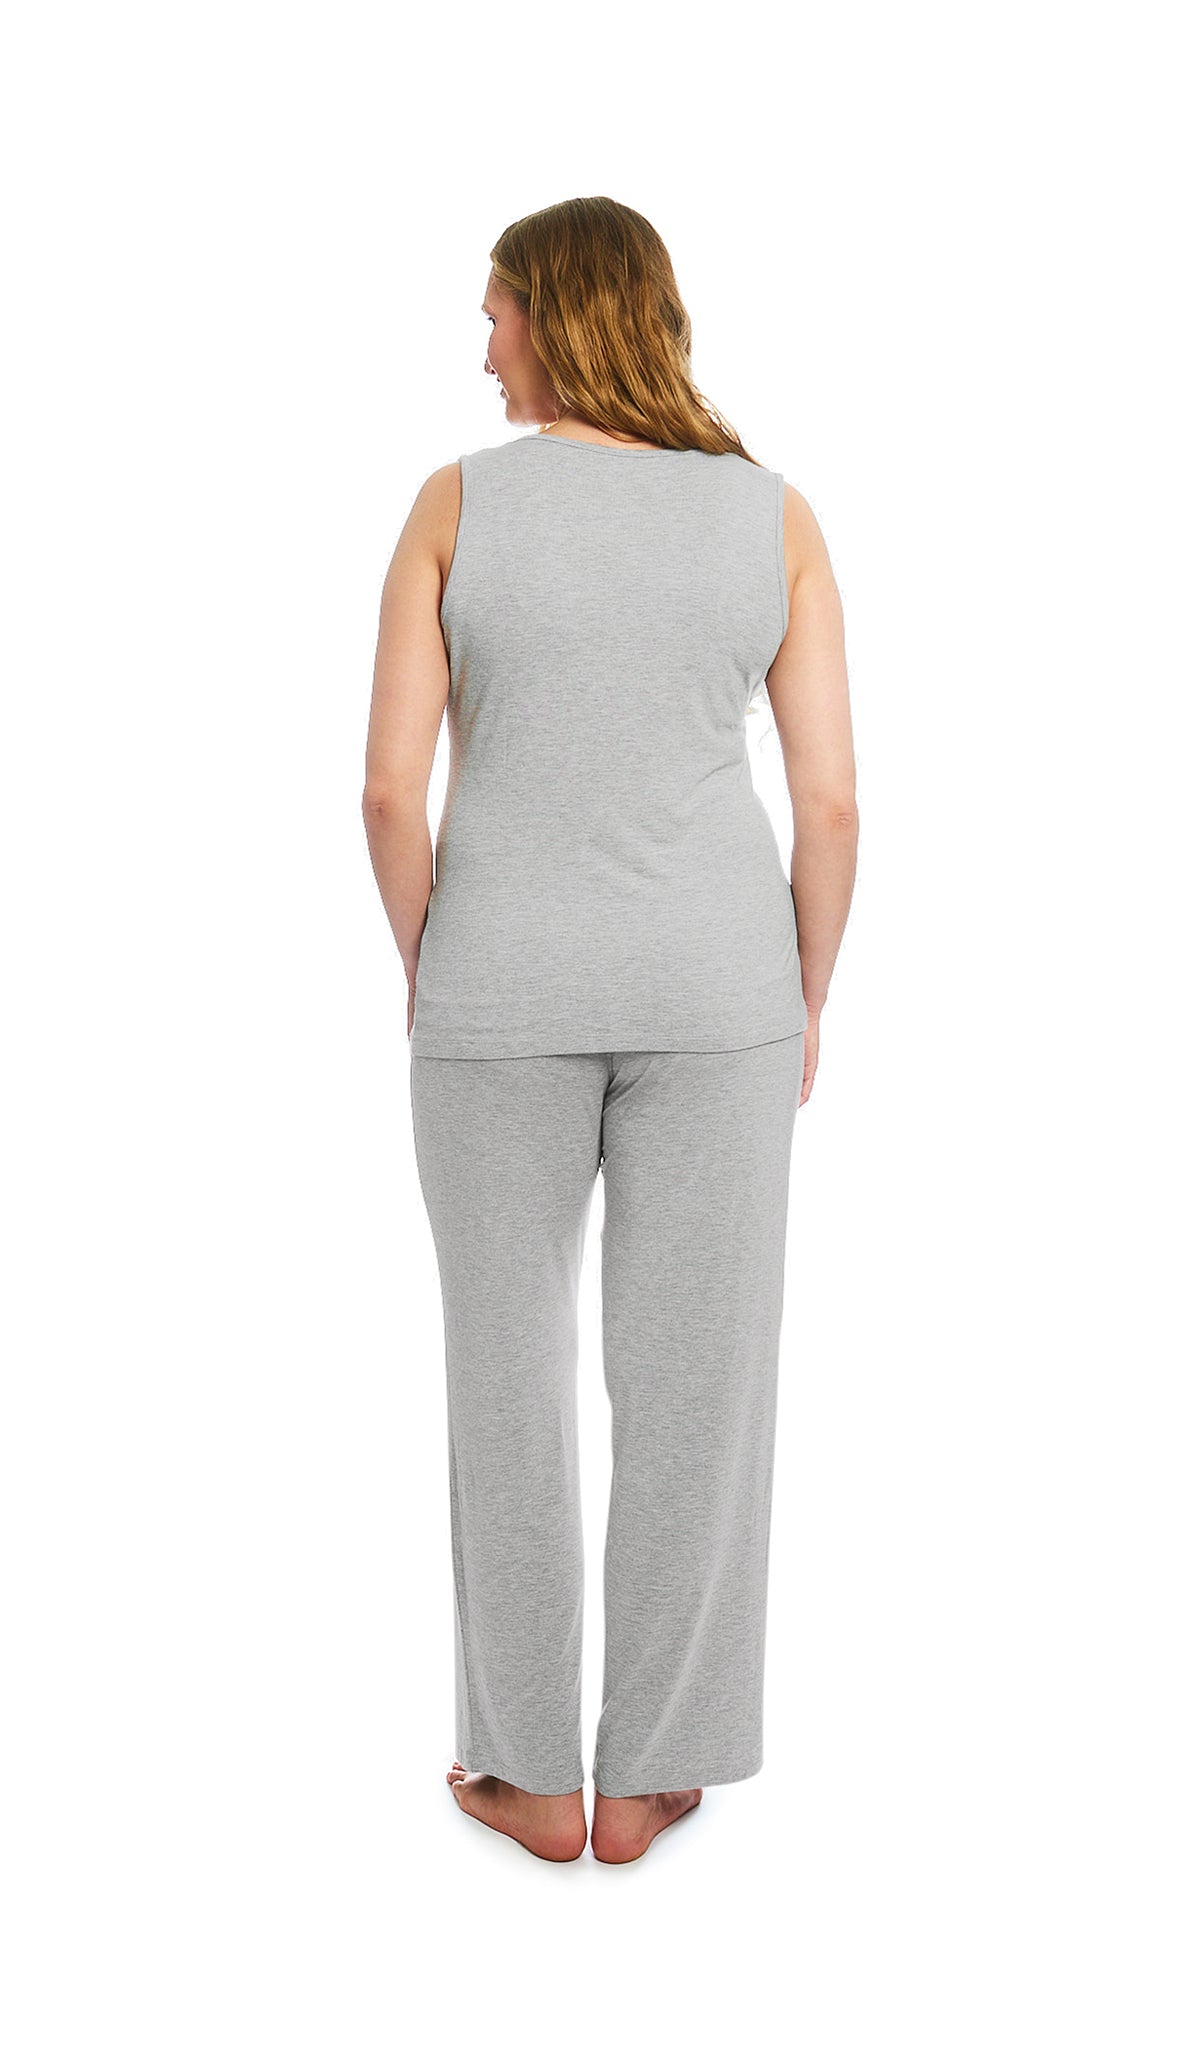 Heather Grey Solid Analise 5-Piece Set, back shot of woman wearing tank top and pant.